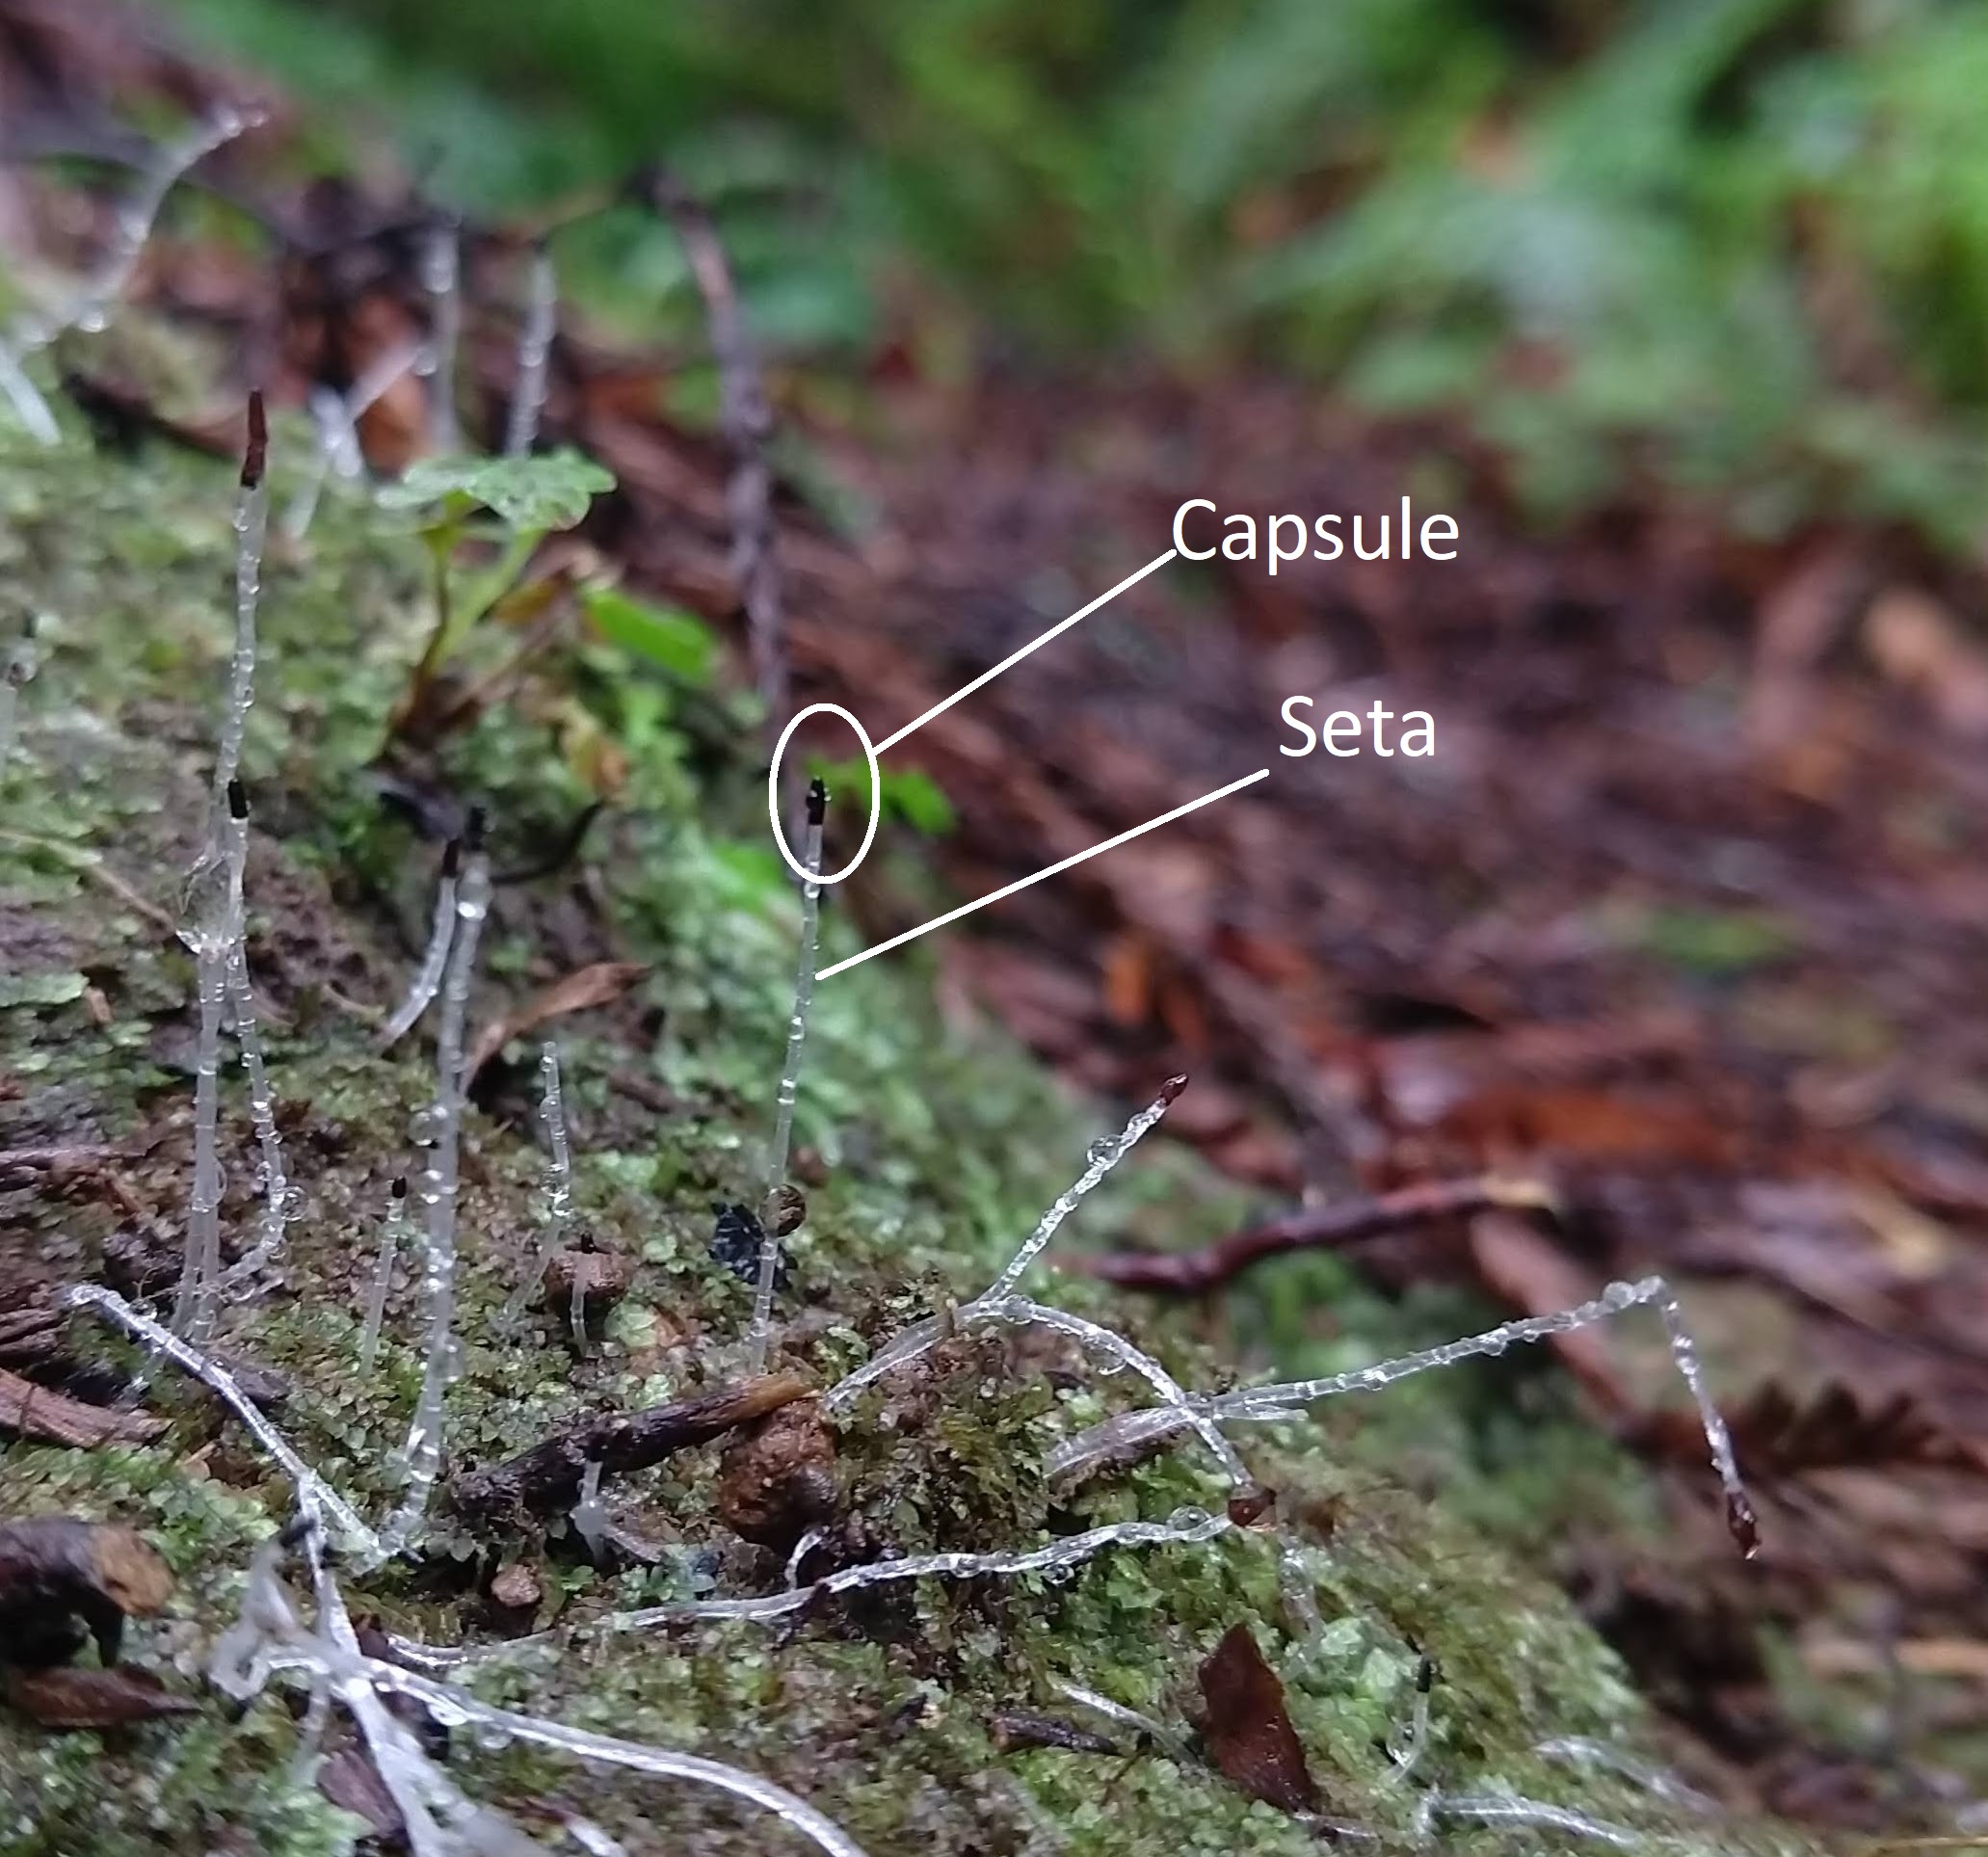 Liverwort sporophytes that are longer and more delicate